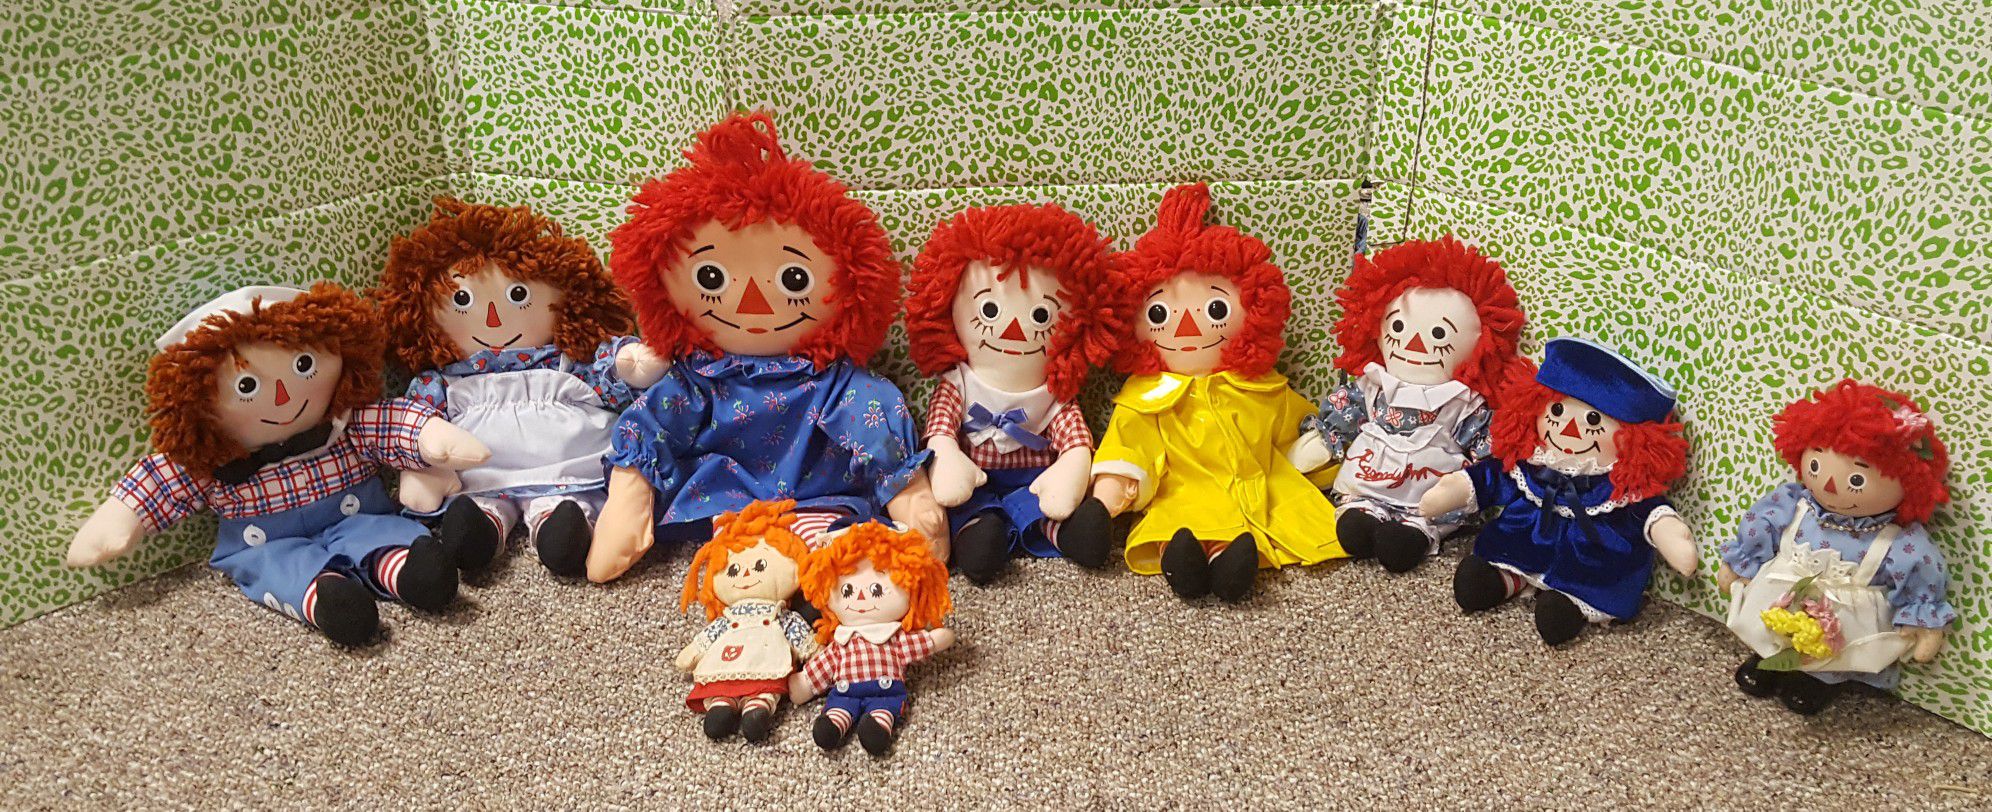 Vintage collectible Raggedy Ann and Andy plush dolls bundle